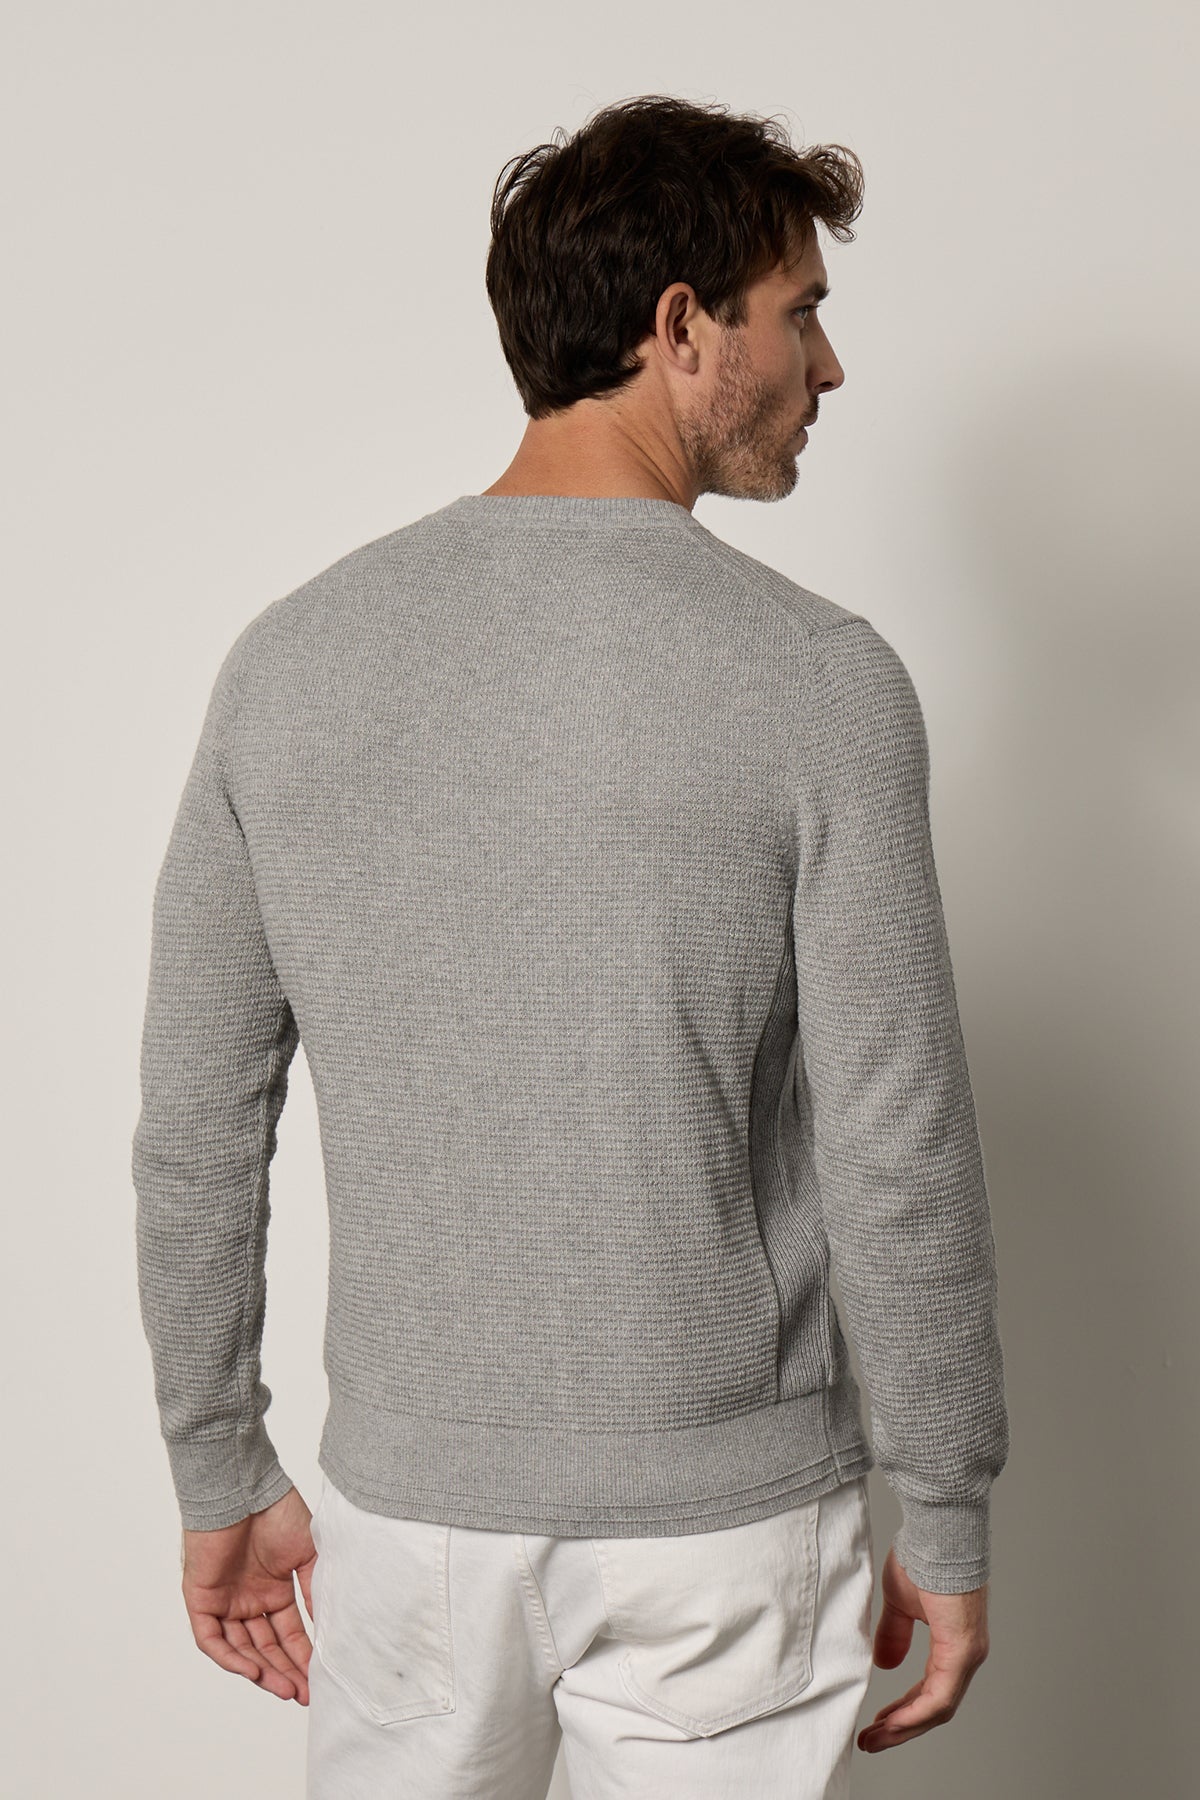 Ace Thermal Crew in heather grey with white denim back-25943733633217